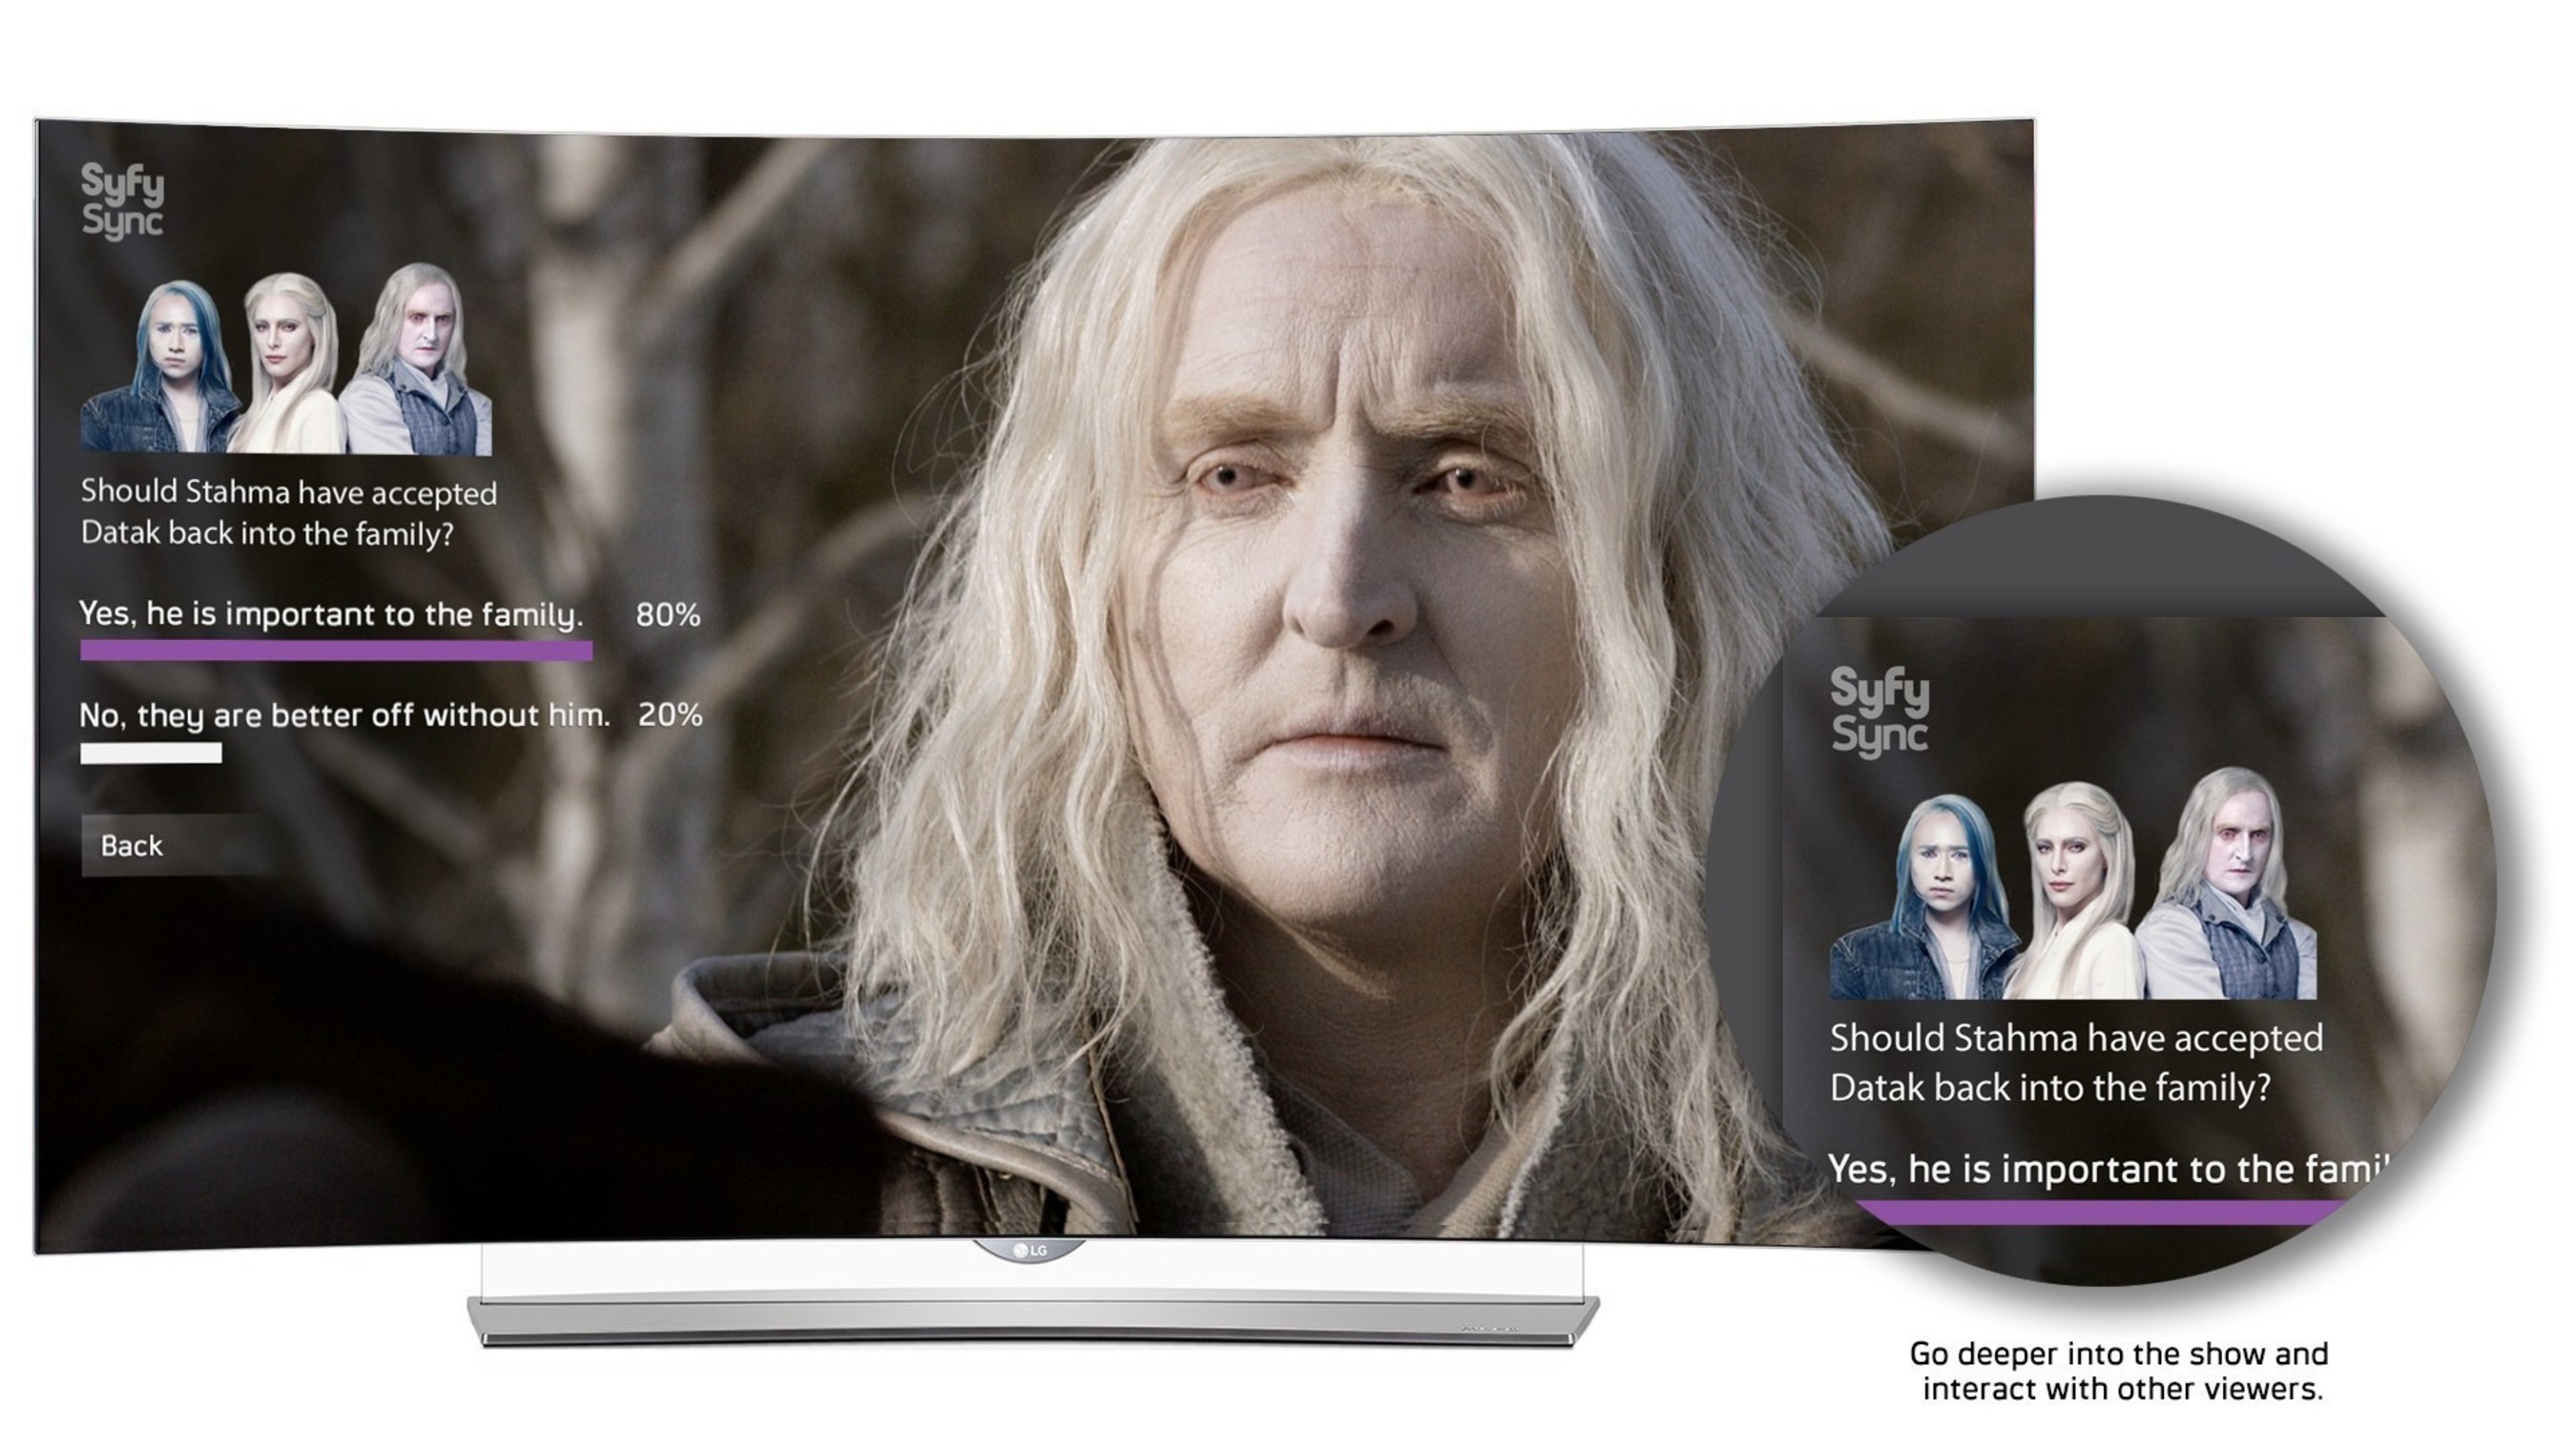 Syfy Sync for LG Smart TV is launching with the Season 3 premiere of fan favorite DEFIANCE on June 12 at 9/8c on Syfy.